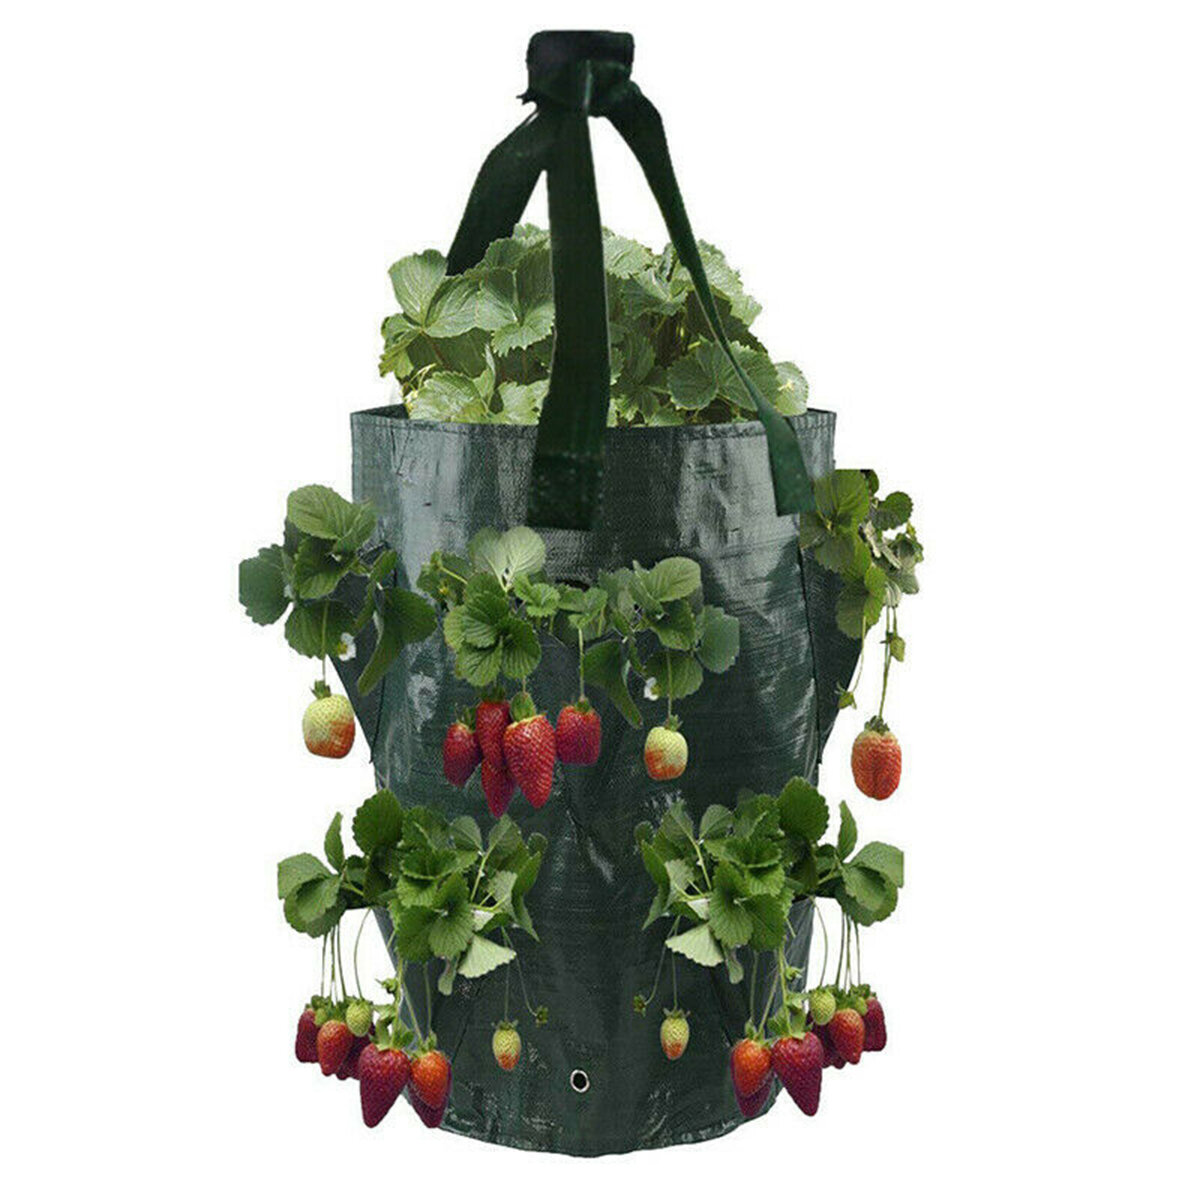 3 Gallon Strawberry Plant Grow Bag Garden Hanging Pouch Flower Herb Bags - US$3.99